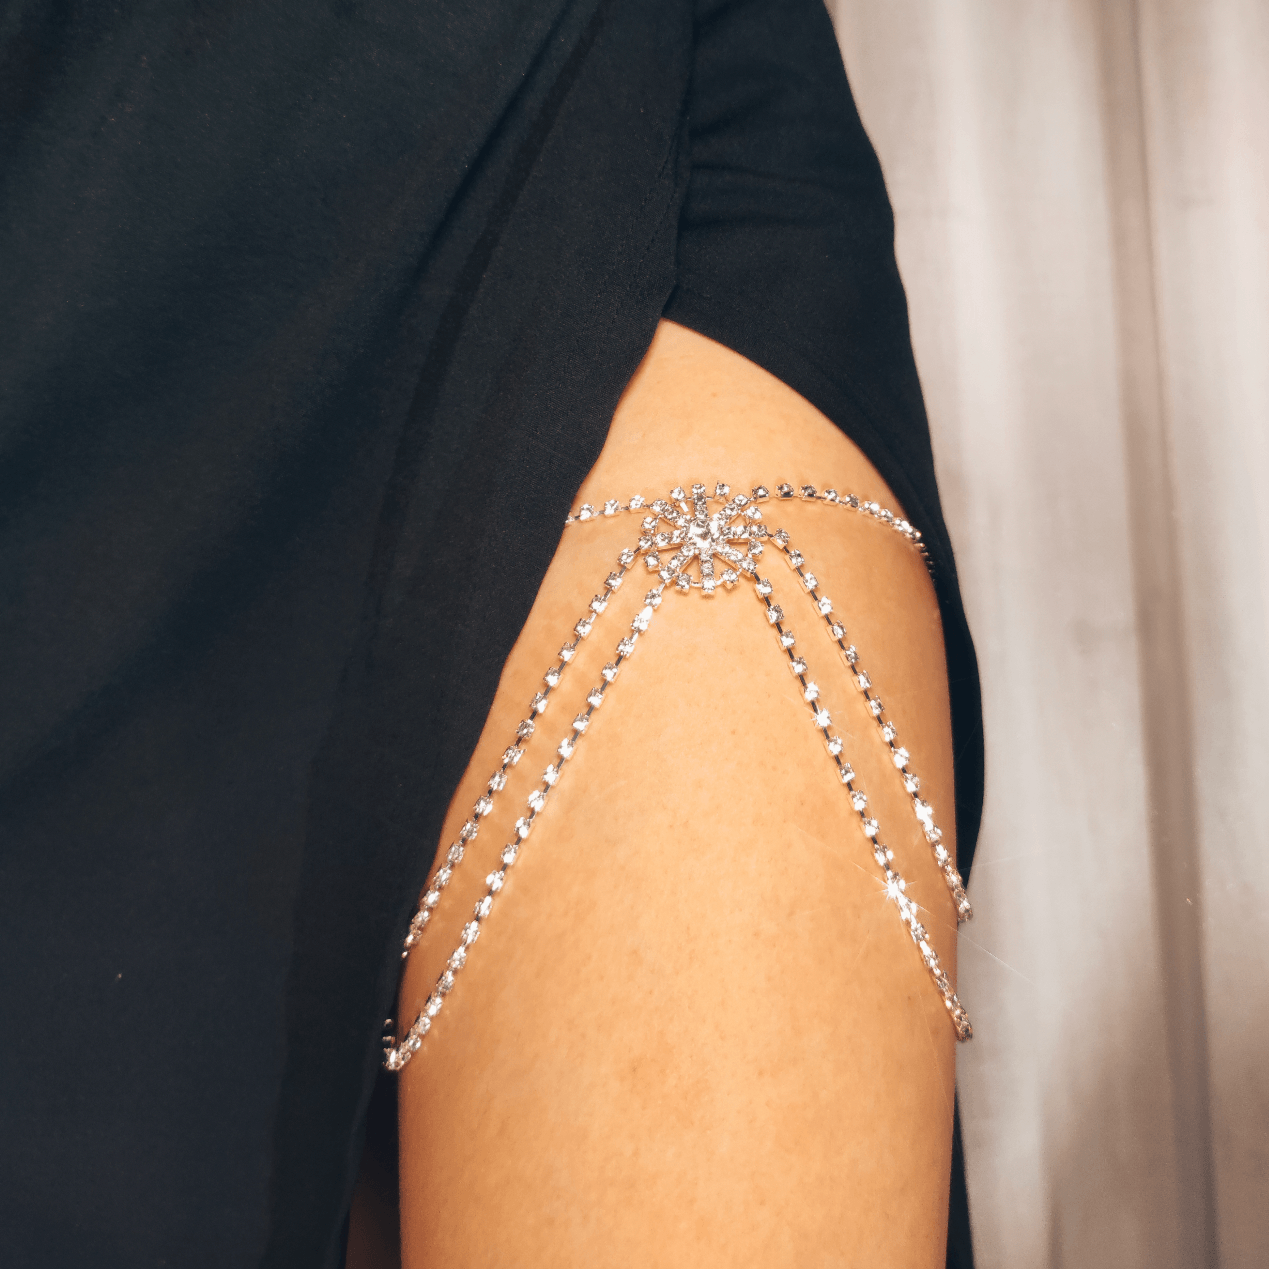 THE MUSE LEG CHAIN - STAY FANCY